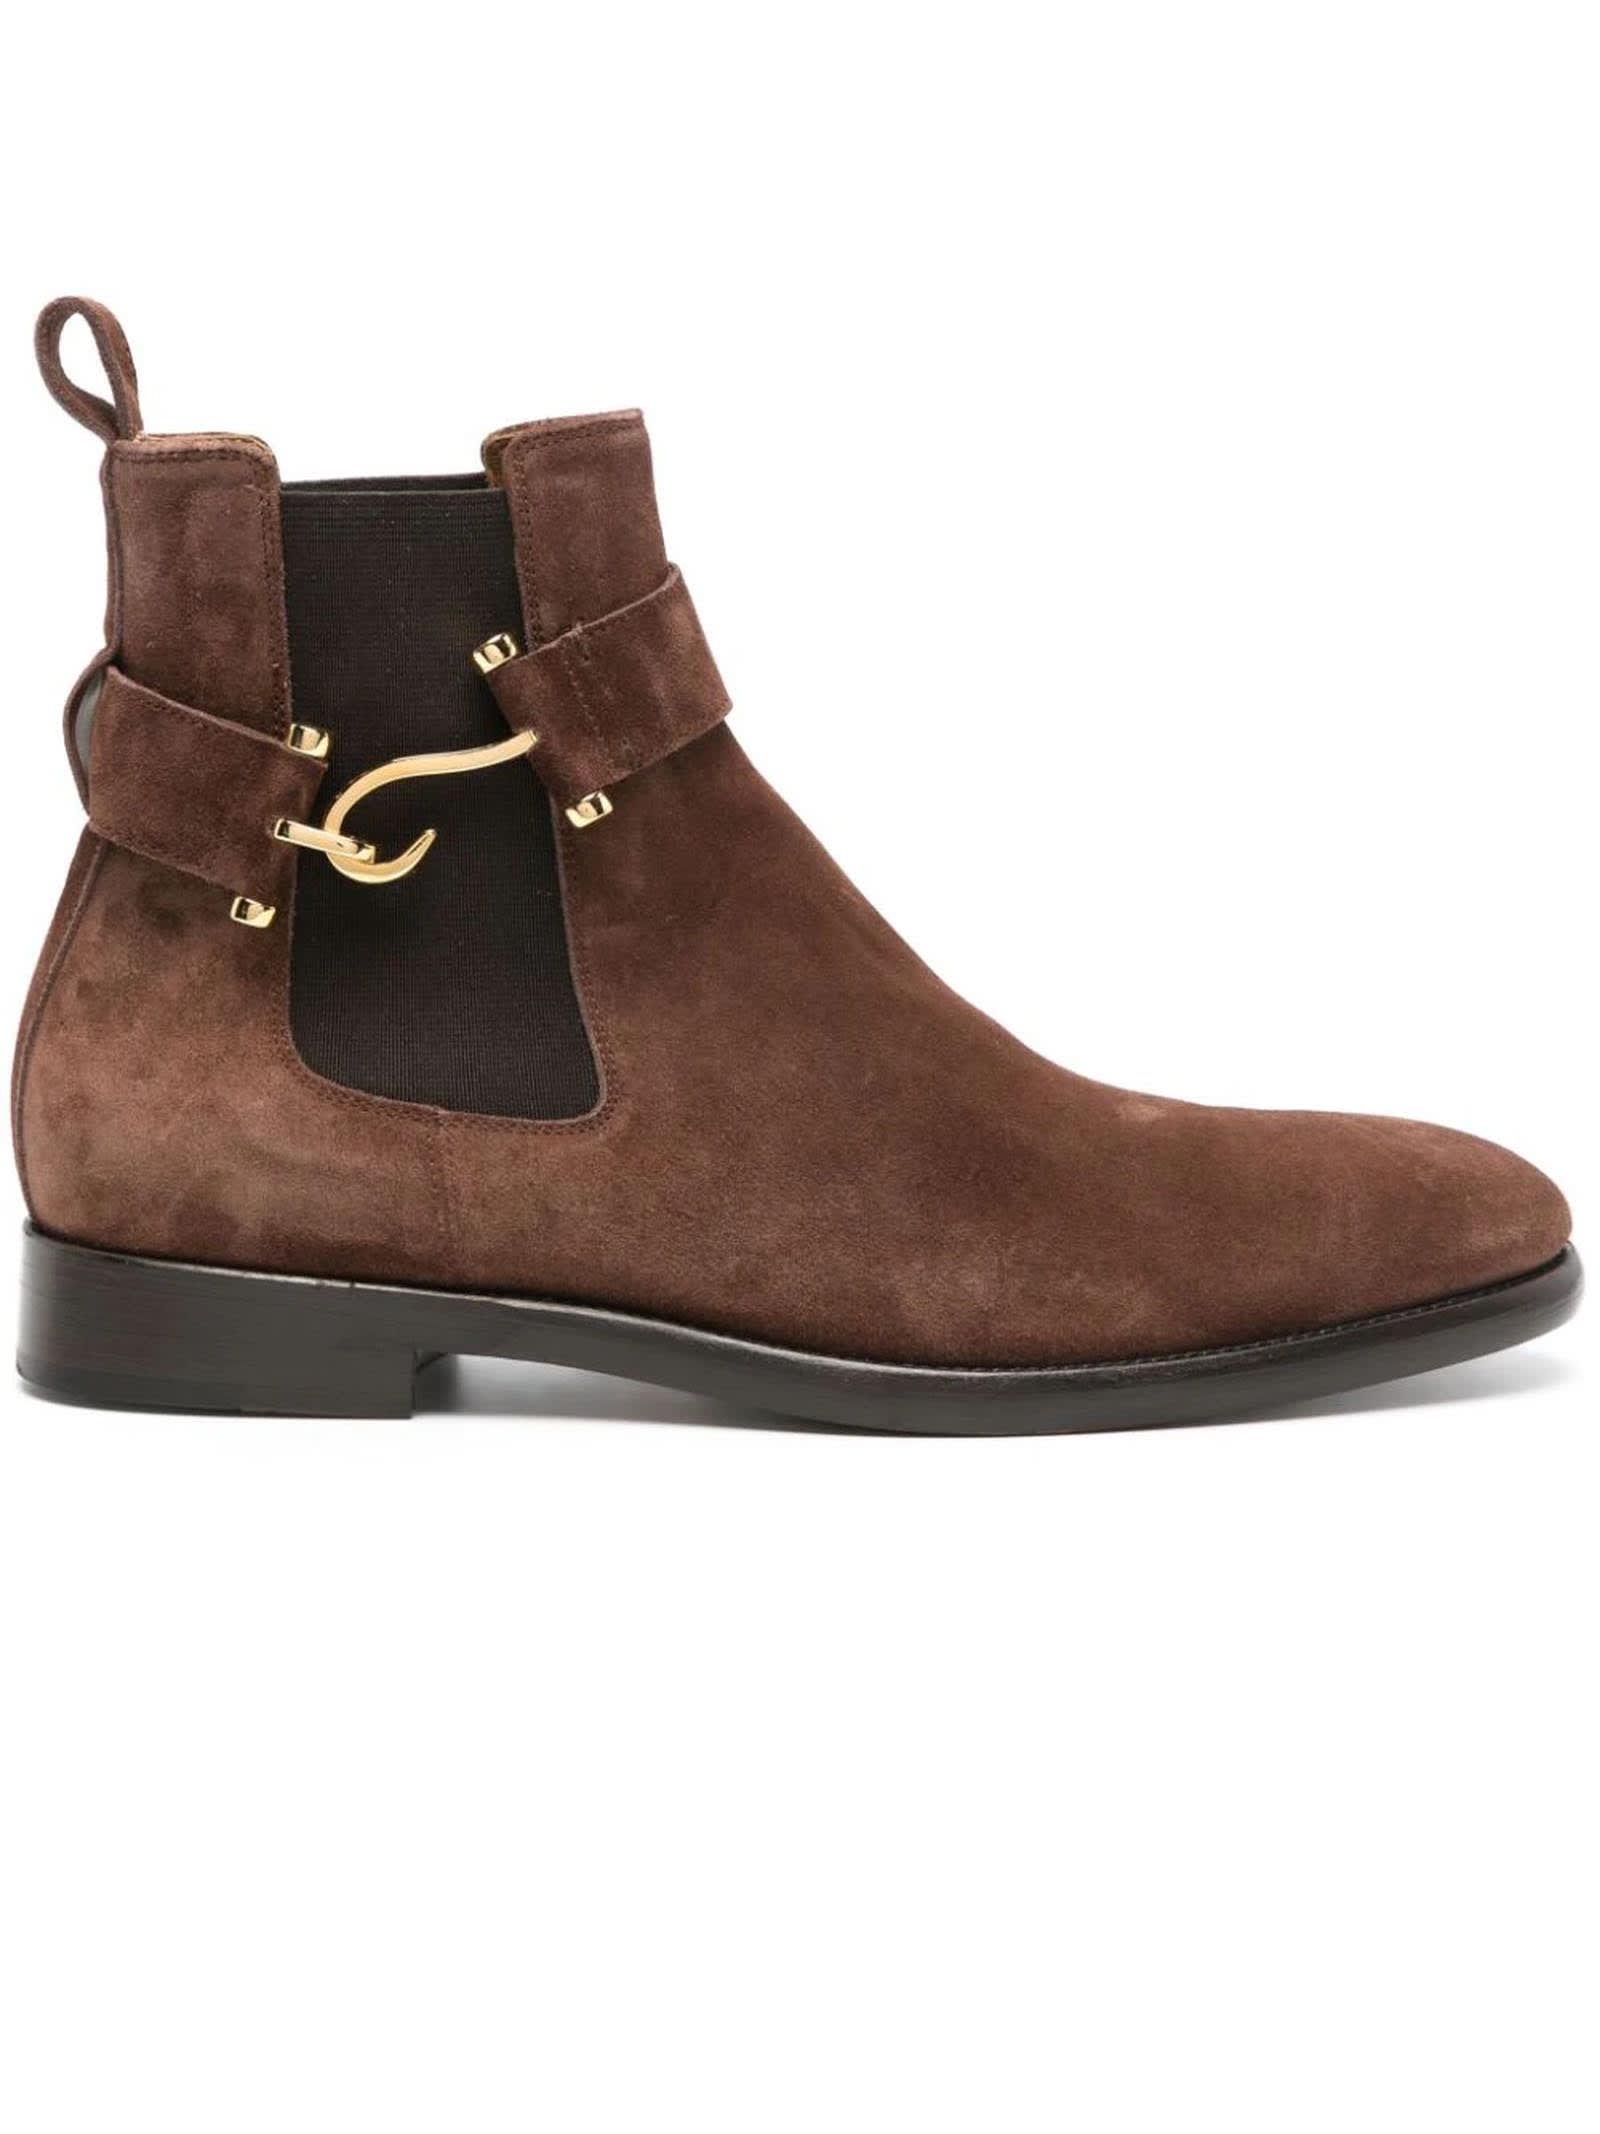 Edhen Milano Brown Suede Ankle Boots